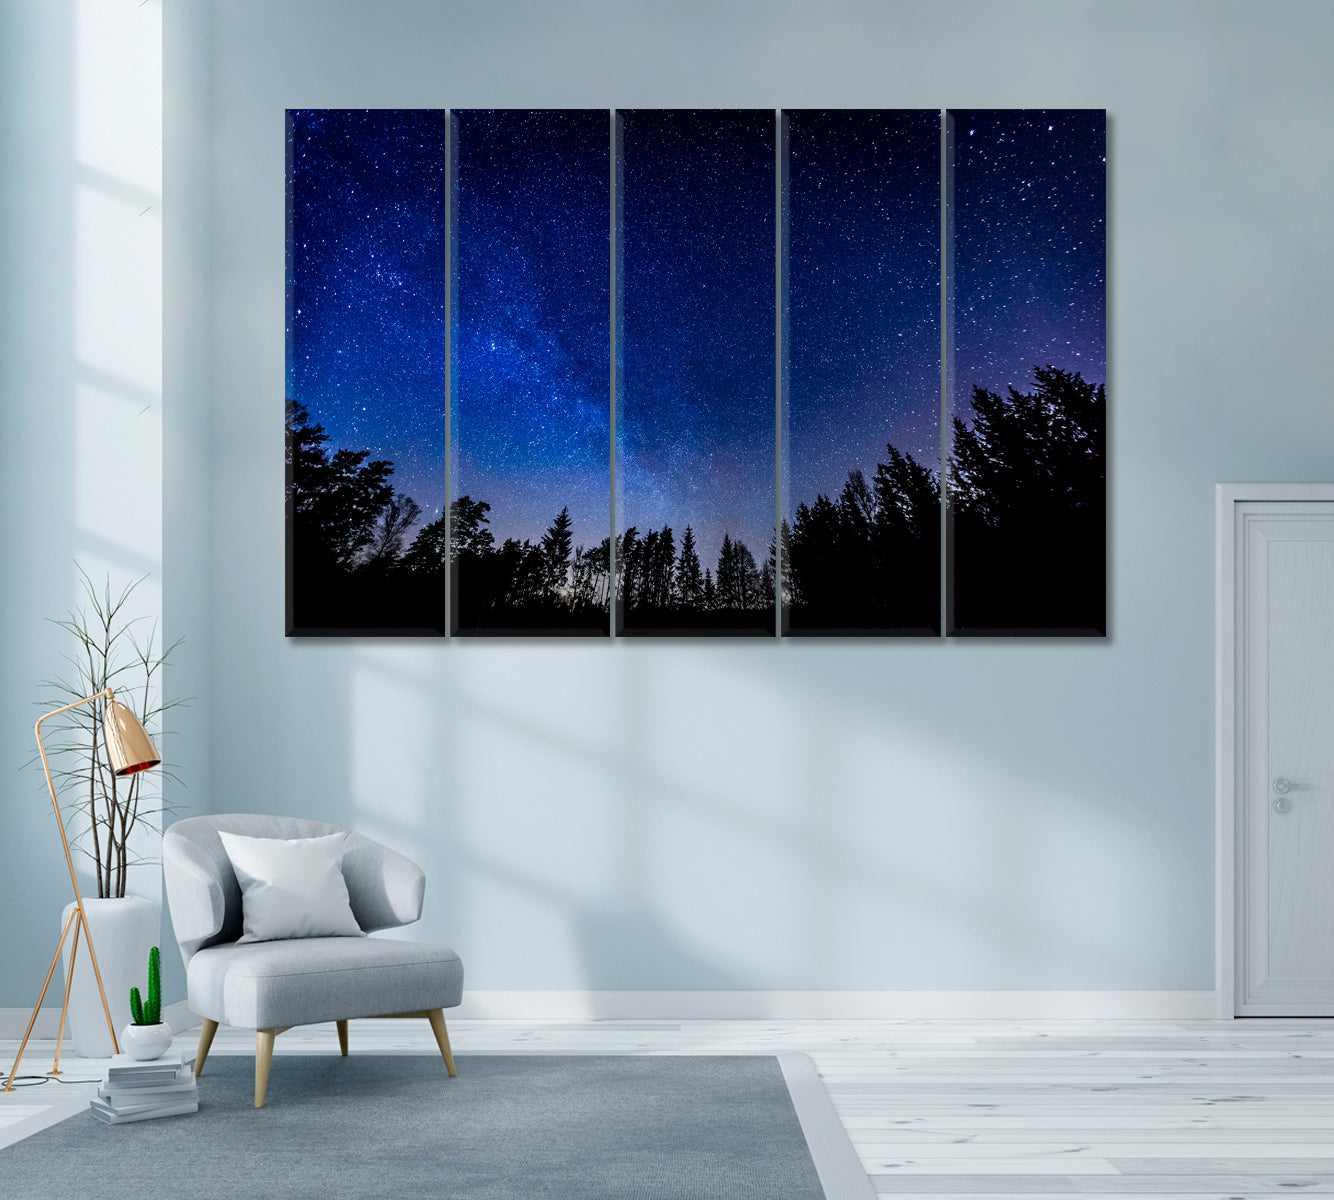 Beautiful Night Starry Sky Canvas Print ArtLexy 5 Panels 36"x24" inches 